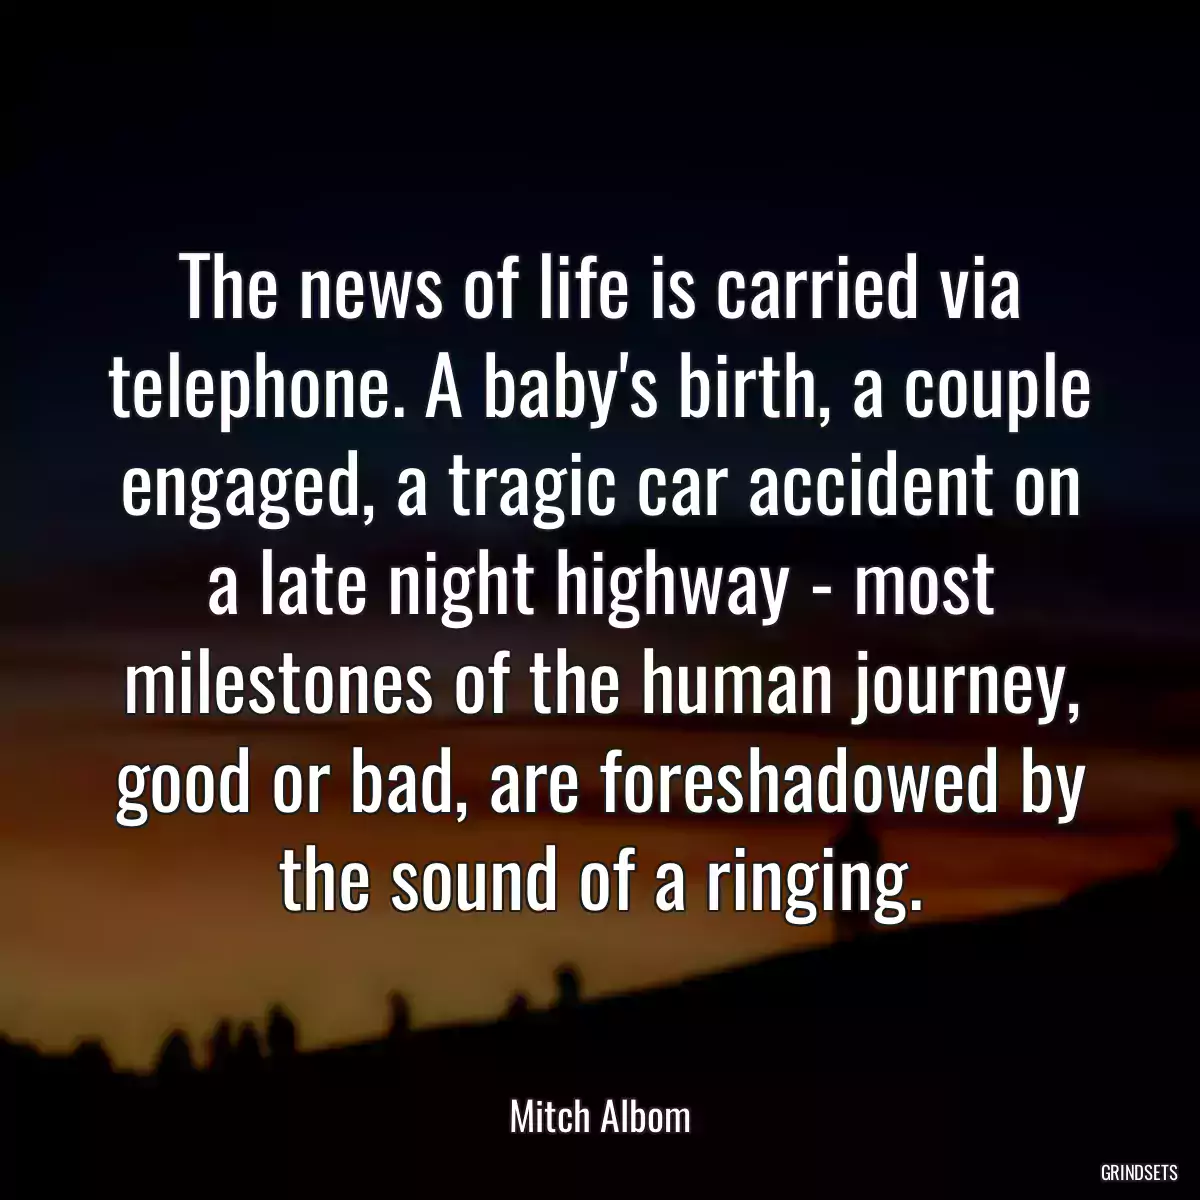 The news of life is carried via telephone. A baby\'s birth, a couple engaged, a tragic car accident on a late night highway - most milestones of the human journey, good or bad, are foreshadowed by the sound of a ringing.